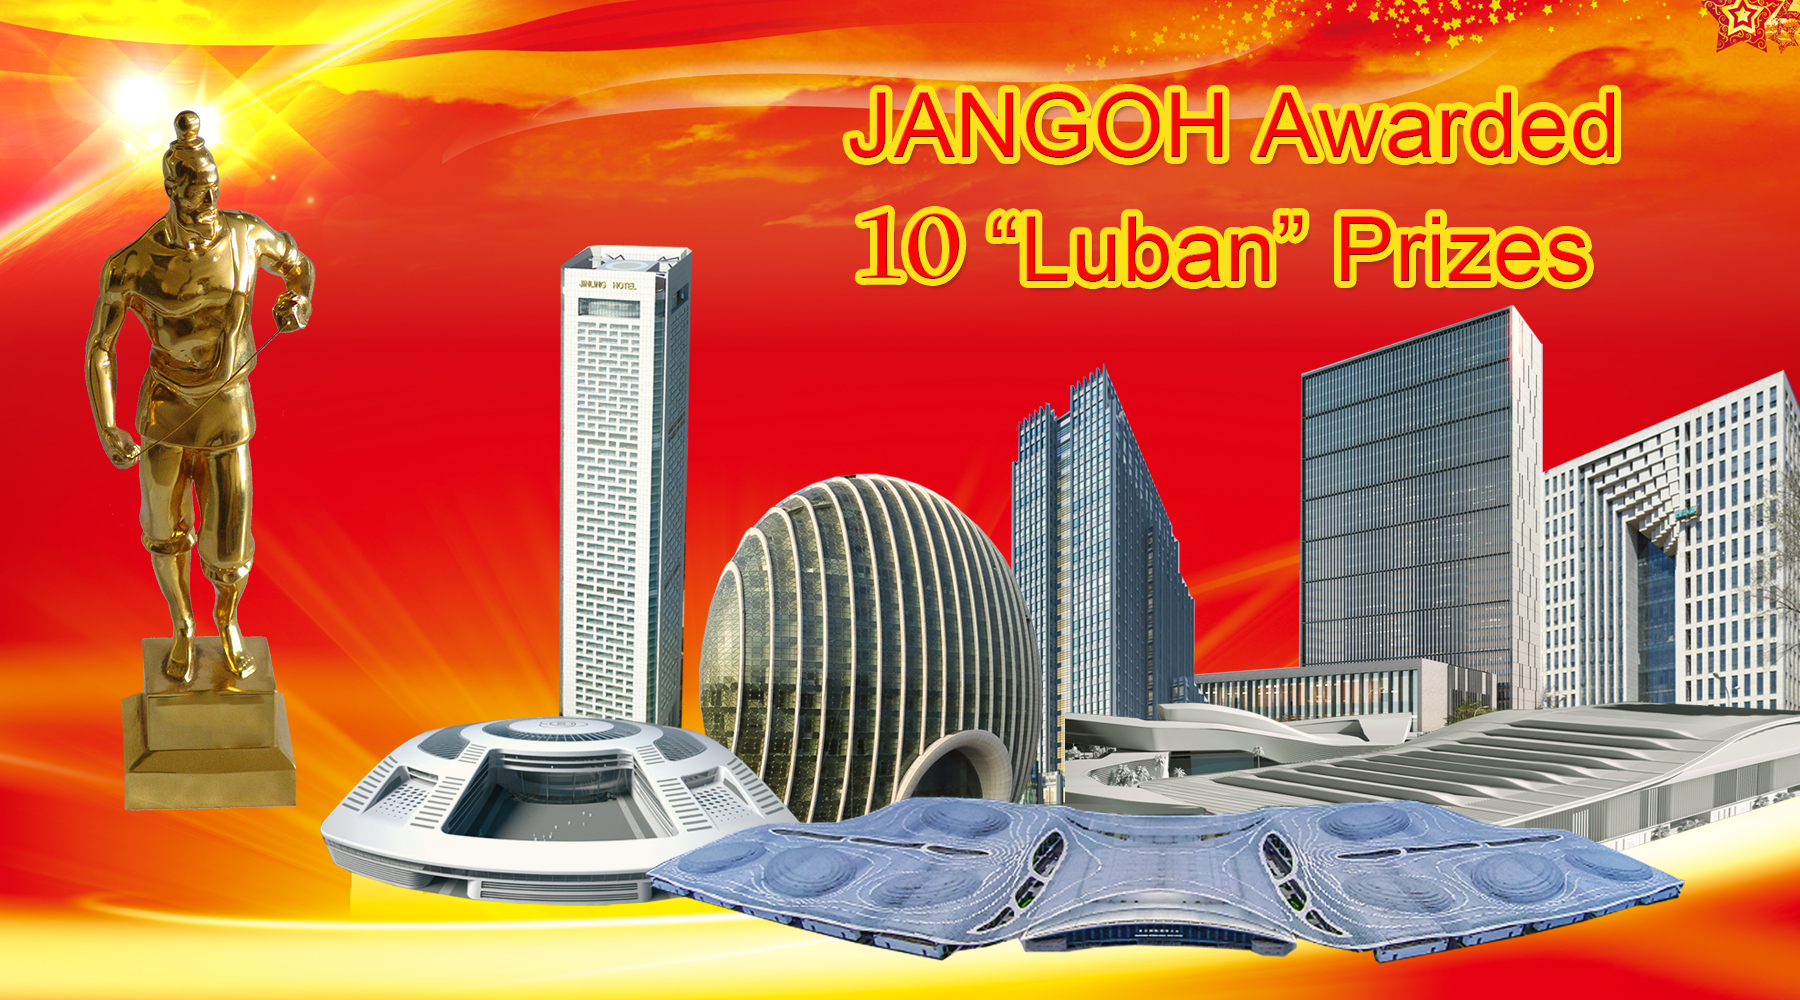 Jangho and its affiliated brands Awarded 10“Luban”Prizes